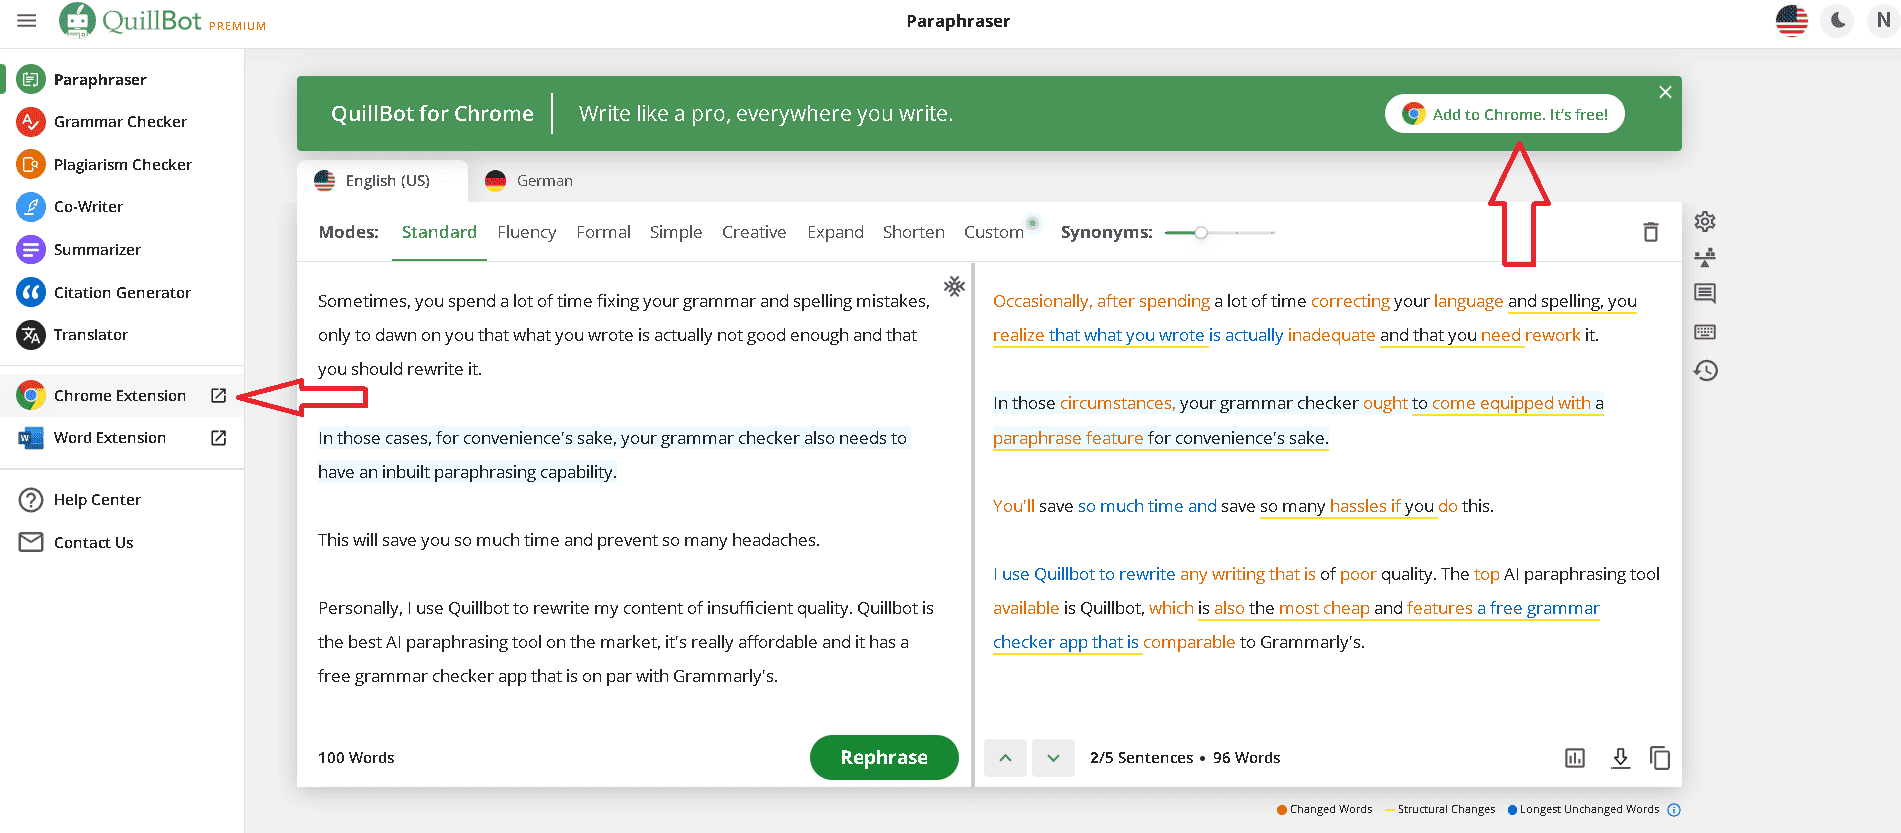 Quillbot Grammar Checker App asks me to install their official Chrome extension